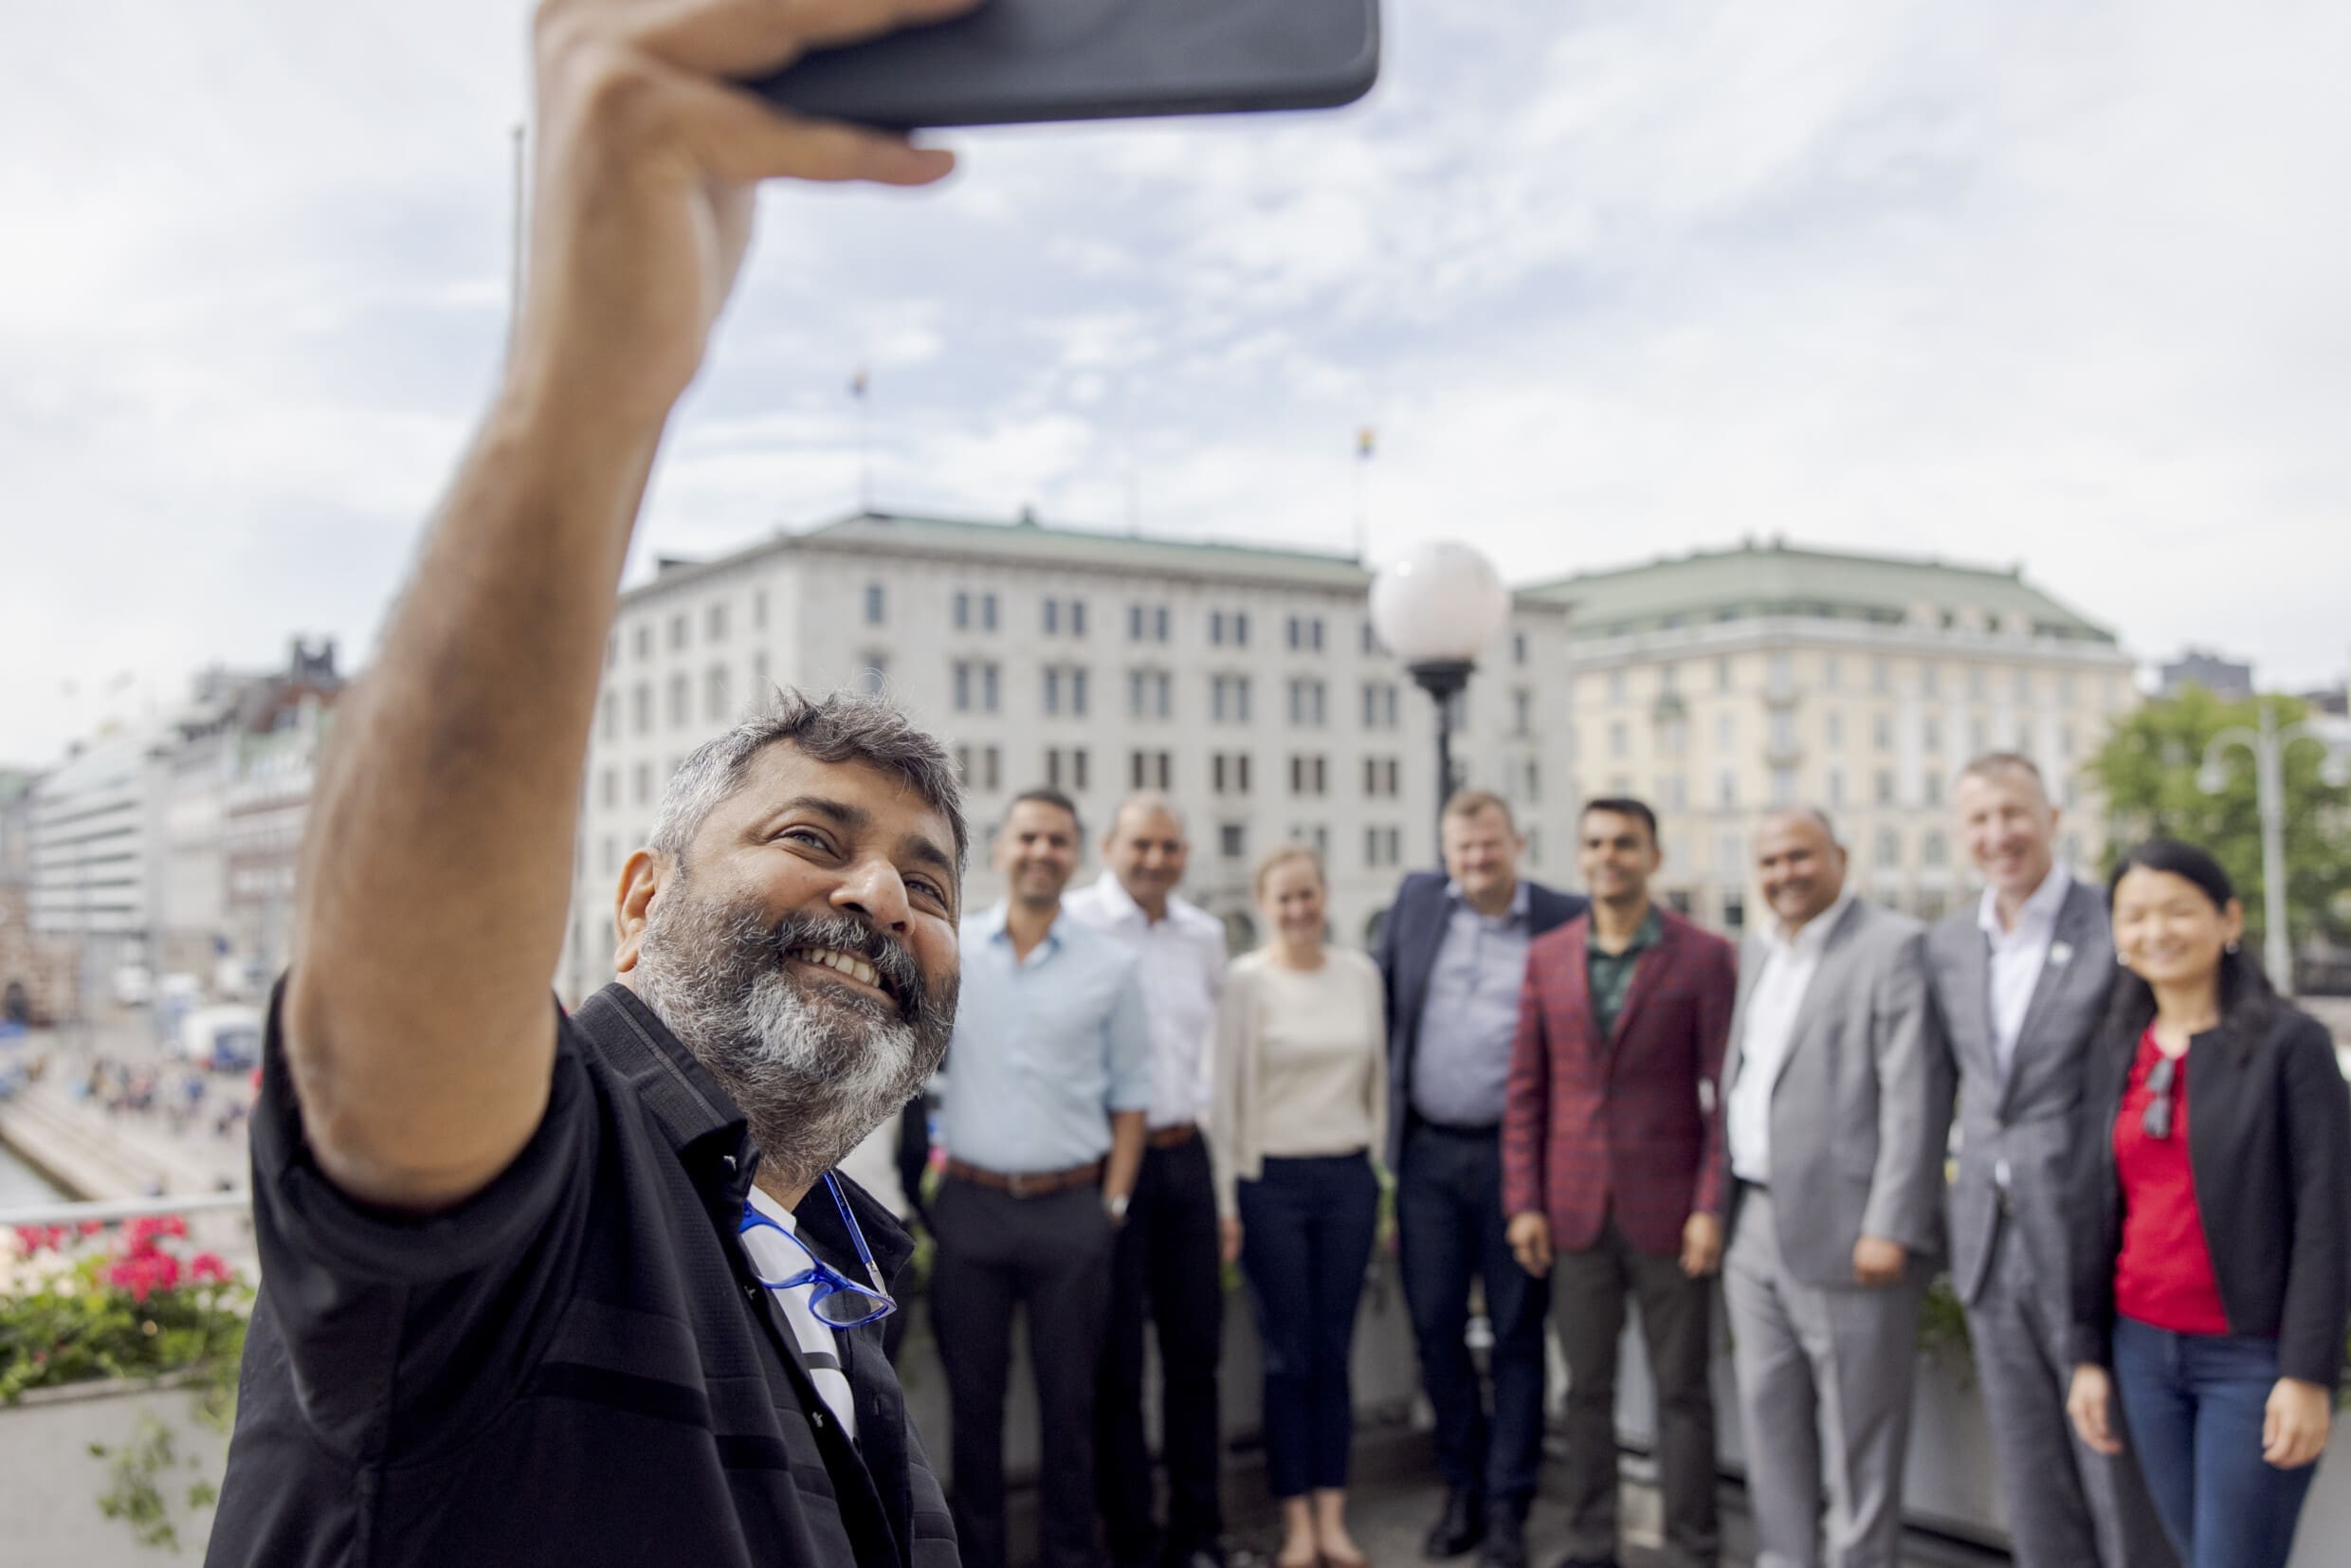 A man holds a phone above his head to snap a selfie of himself and a group of people behind him.